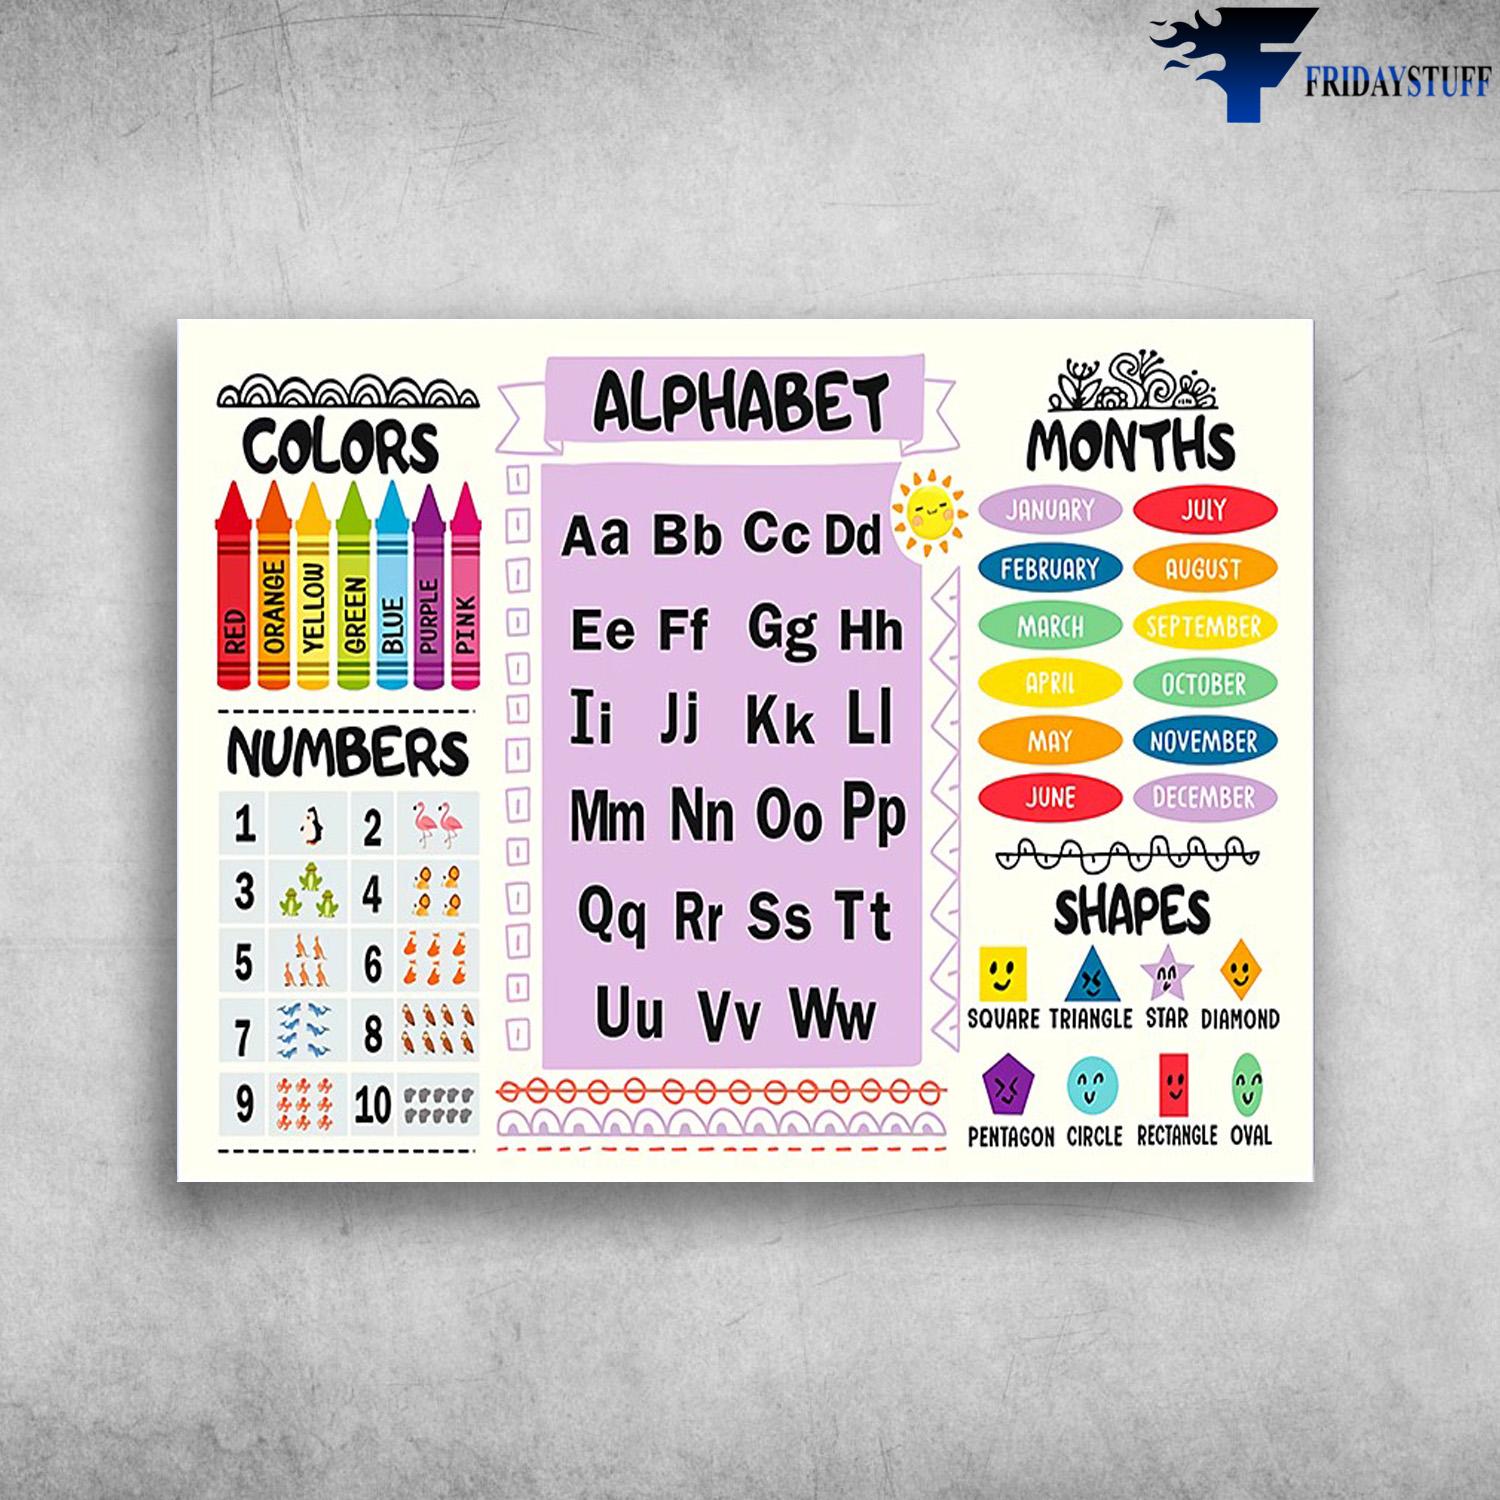 Classroom Poster, Colors, Number, Alphbet, Months, Shapes